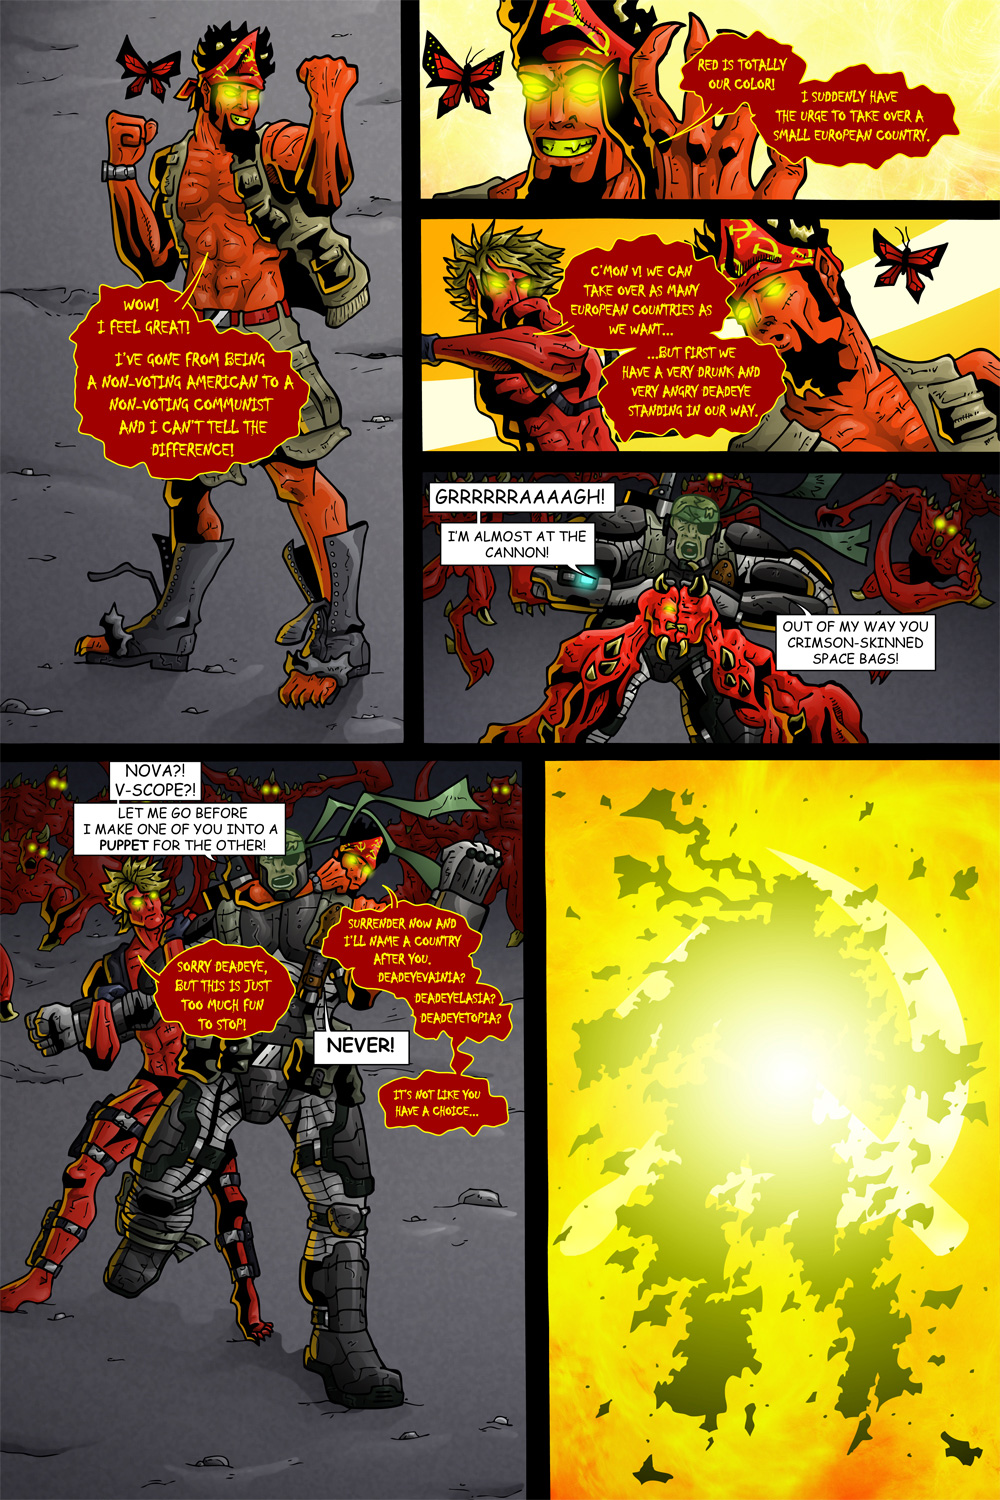 MISSION 006: PAGE 20 “CRIMSON-SKINNED SPACE BAGS”